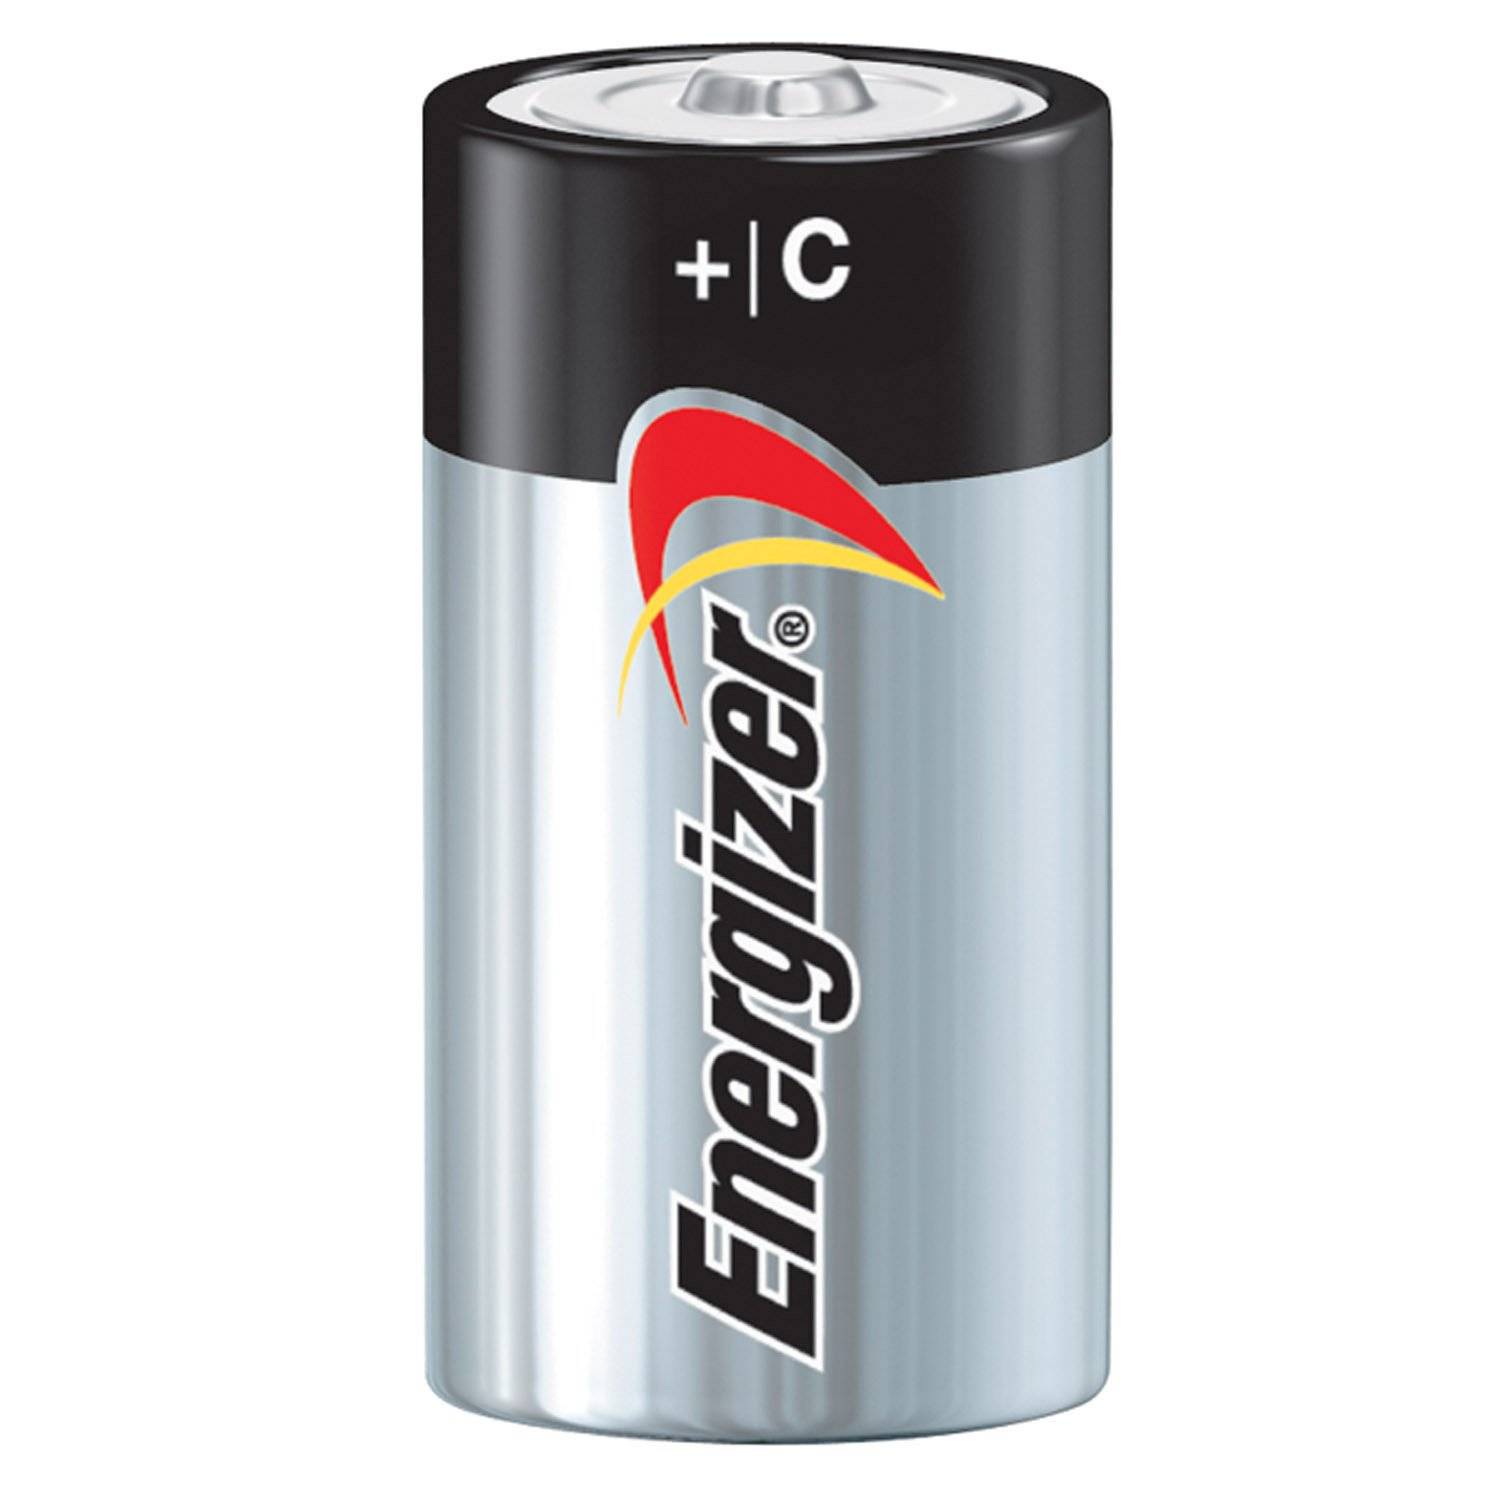 Energizer MAX C Cell Batteries